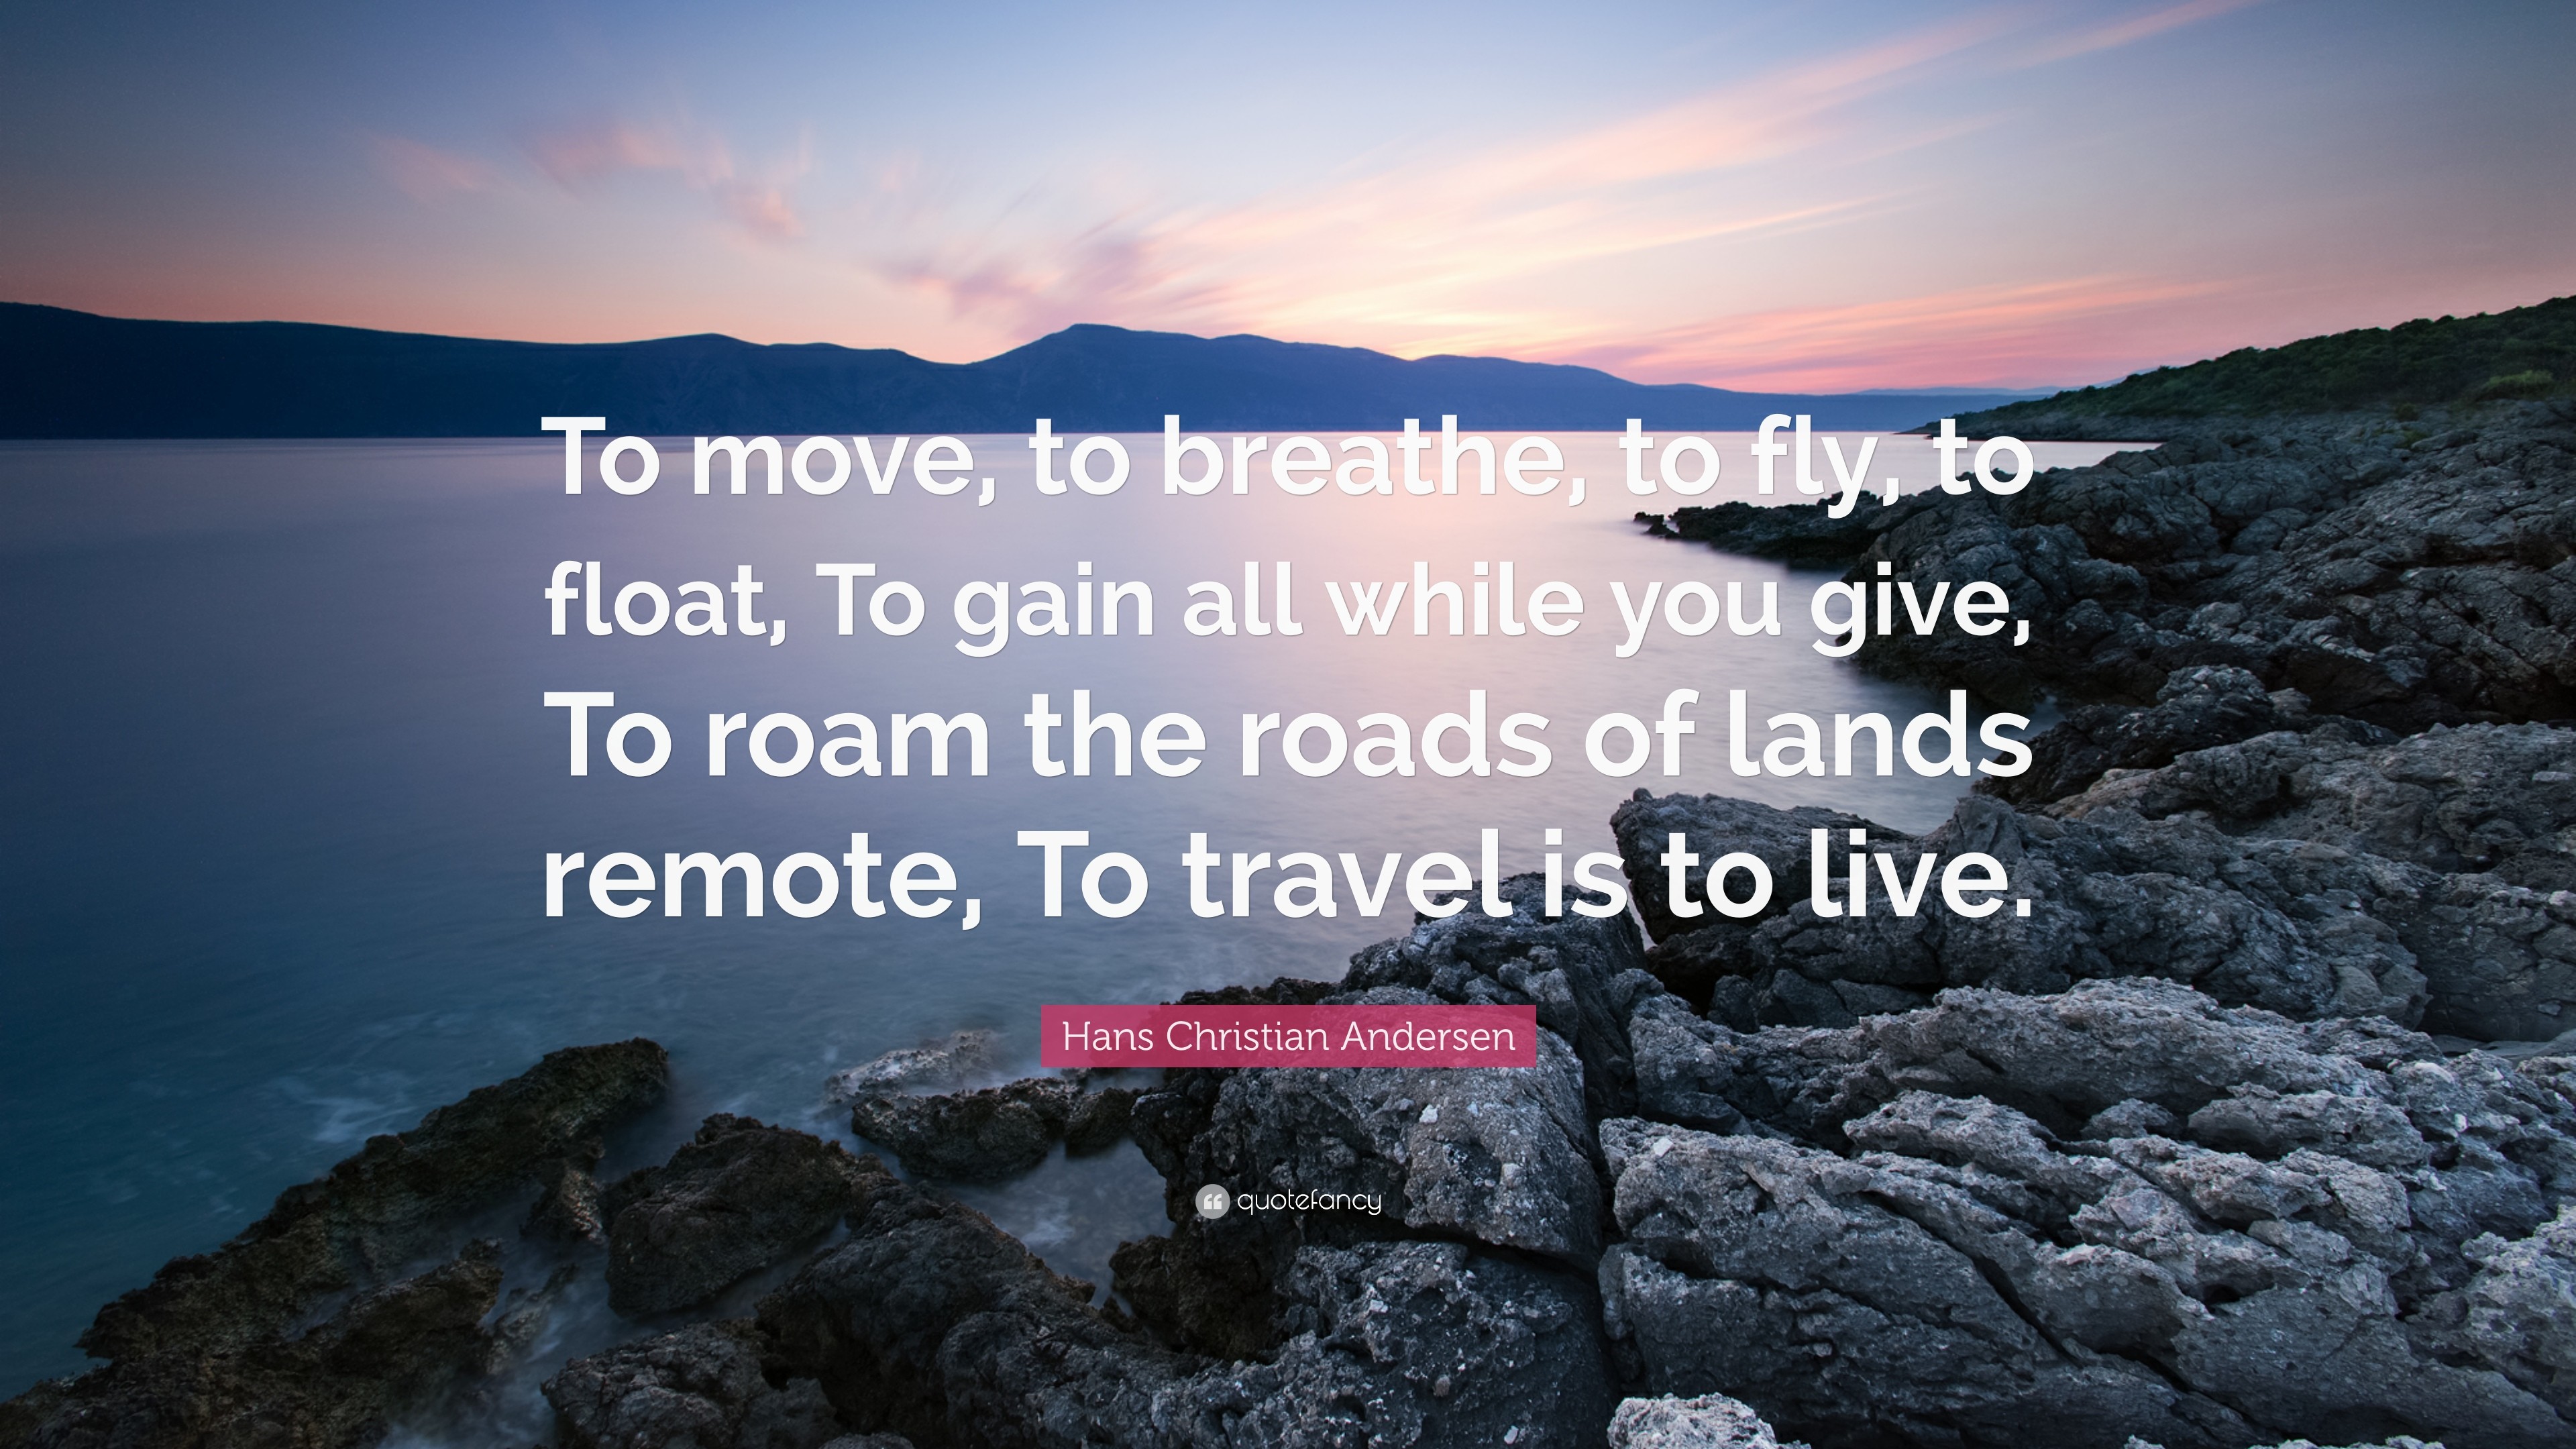 3840x2160 Hans Christian Andersen Quote: “To move, to breathe, to fly, to